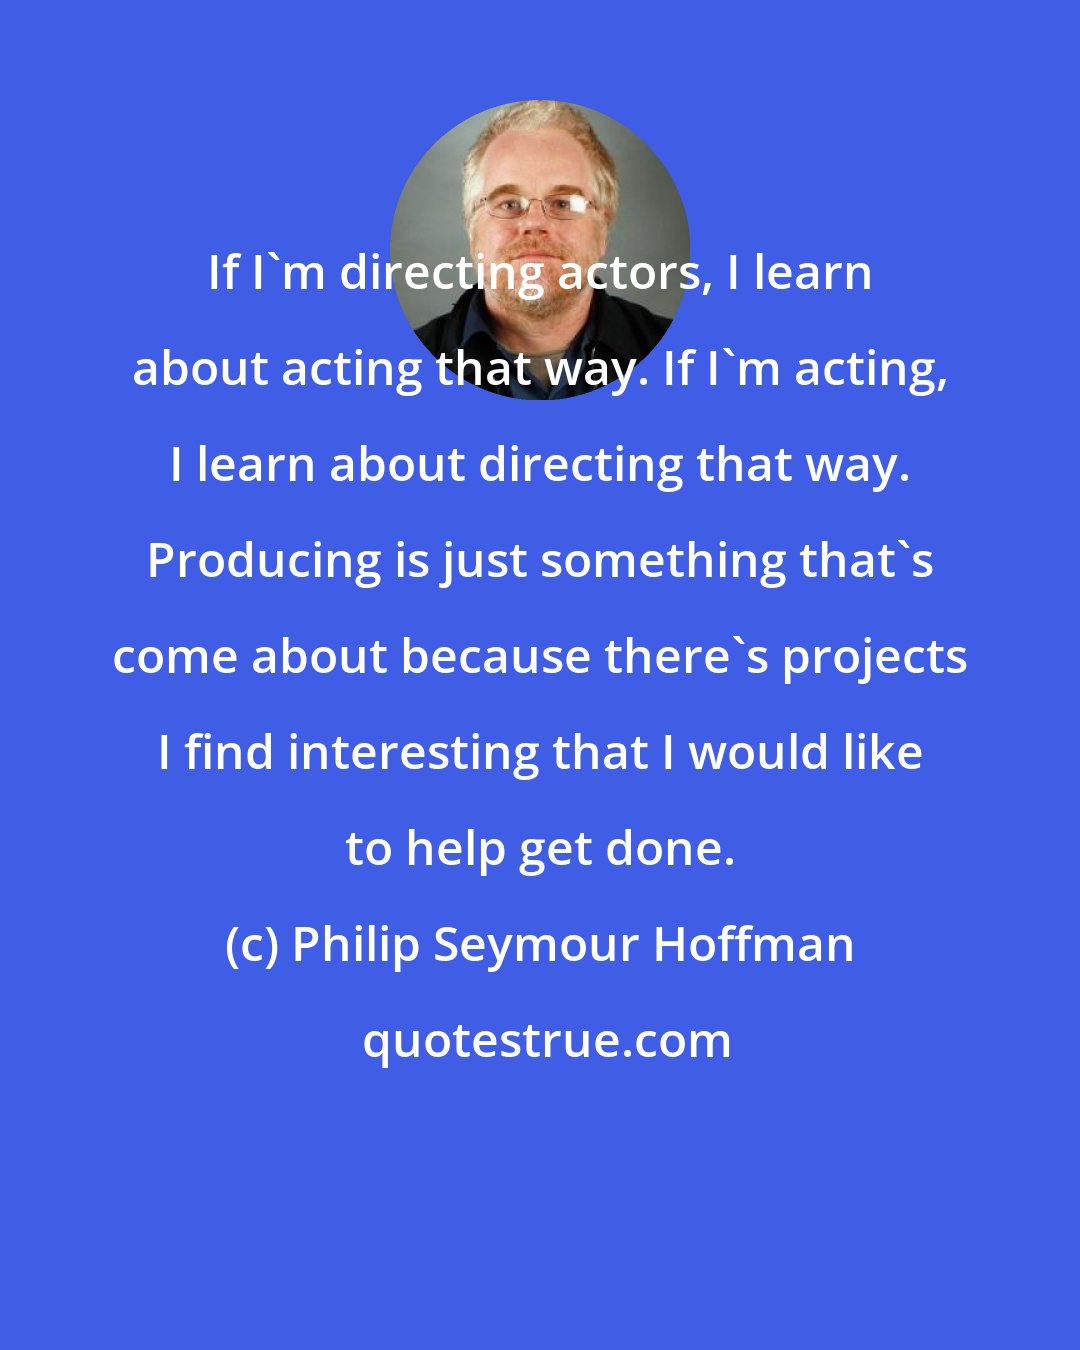 Philip Seymour Hoffman: If I'm directing actors, I learn about acting that way. If I'm acting, I learn about directing that way. Producing is just something that's come about because there's projects I find interesting that I would like to help get done.